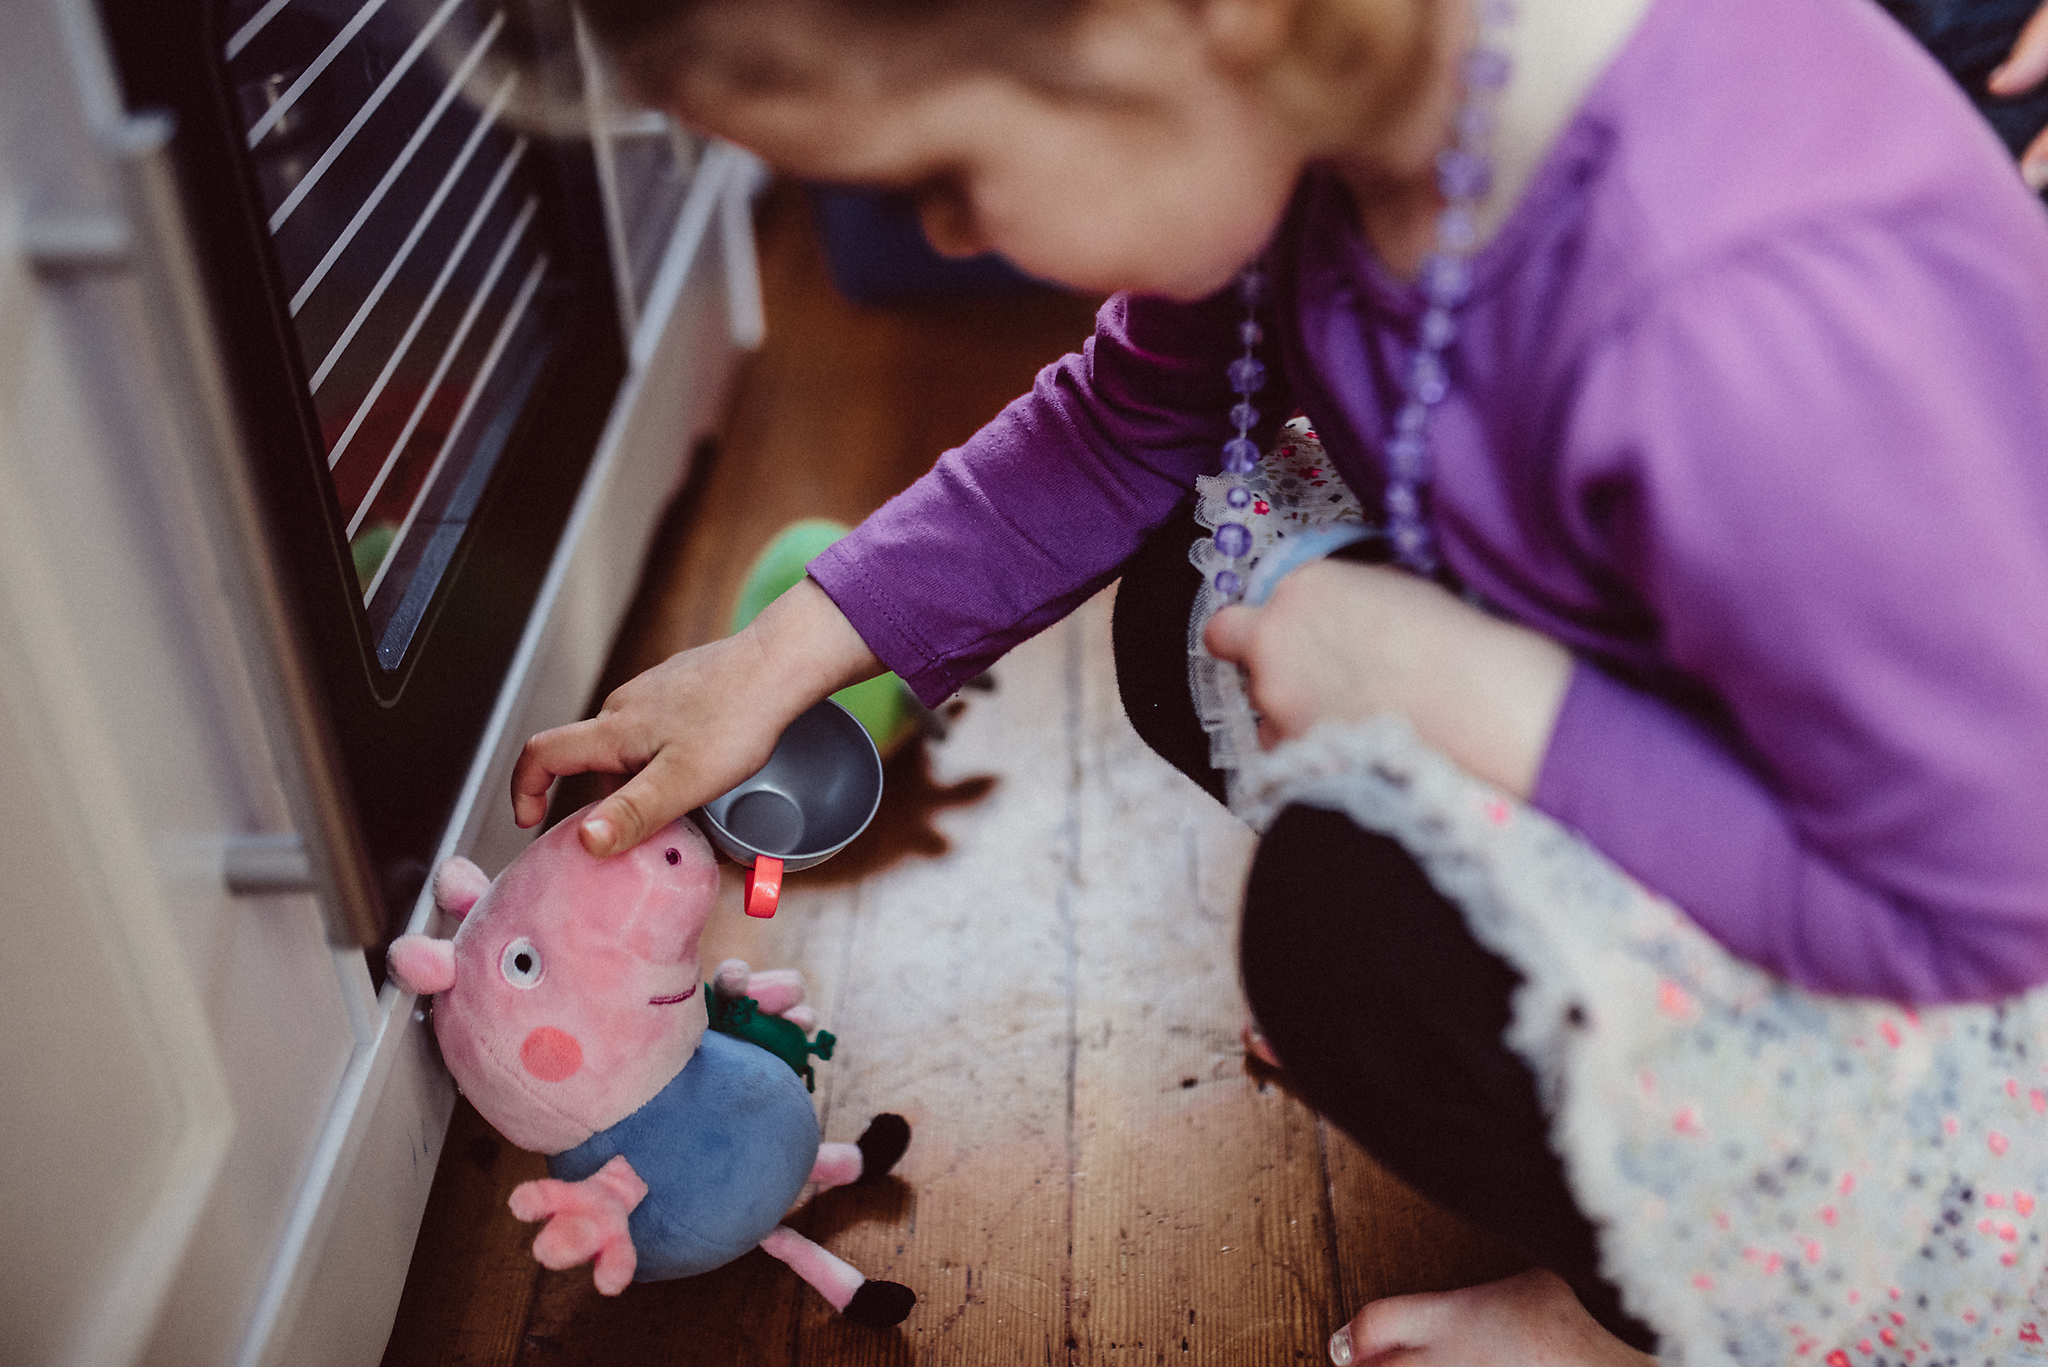 Little girl playing with stuffed pig in kitchen play room